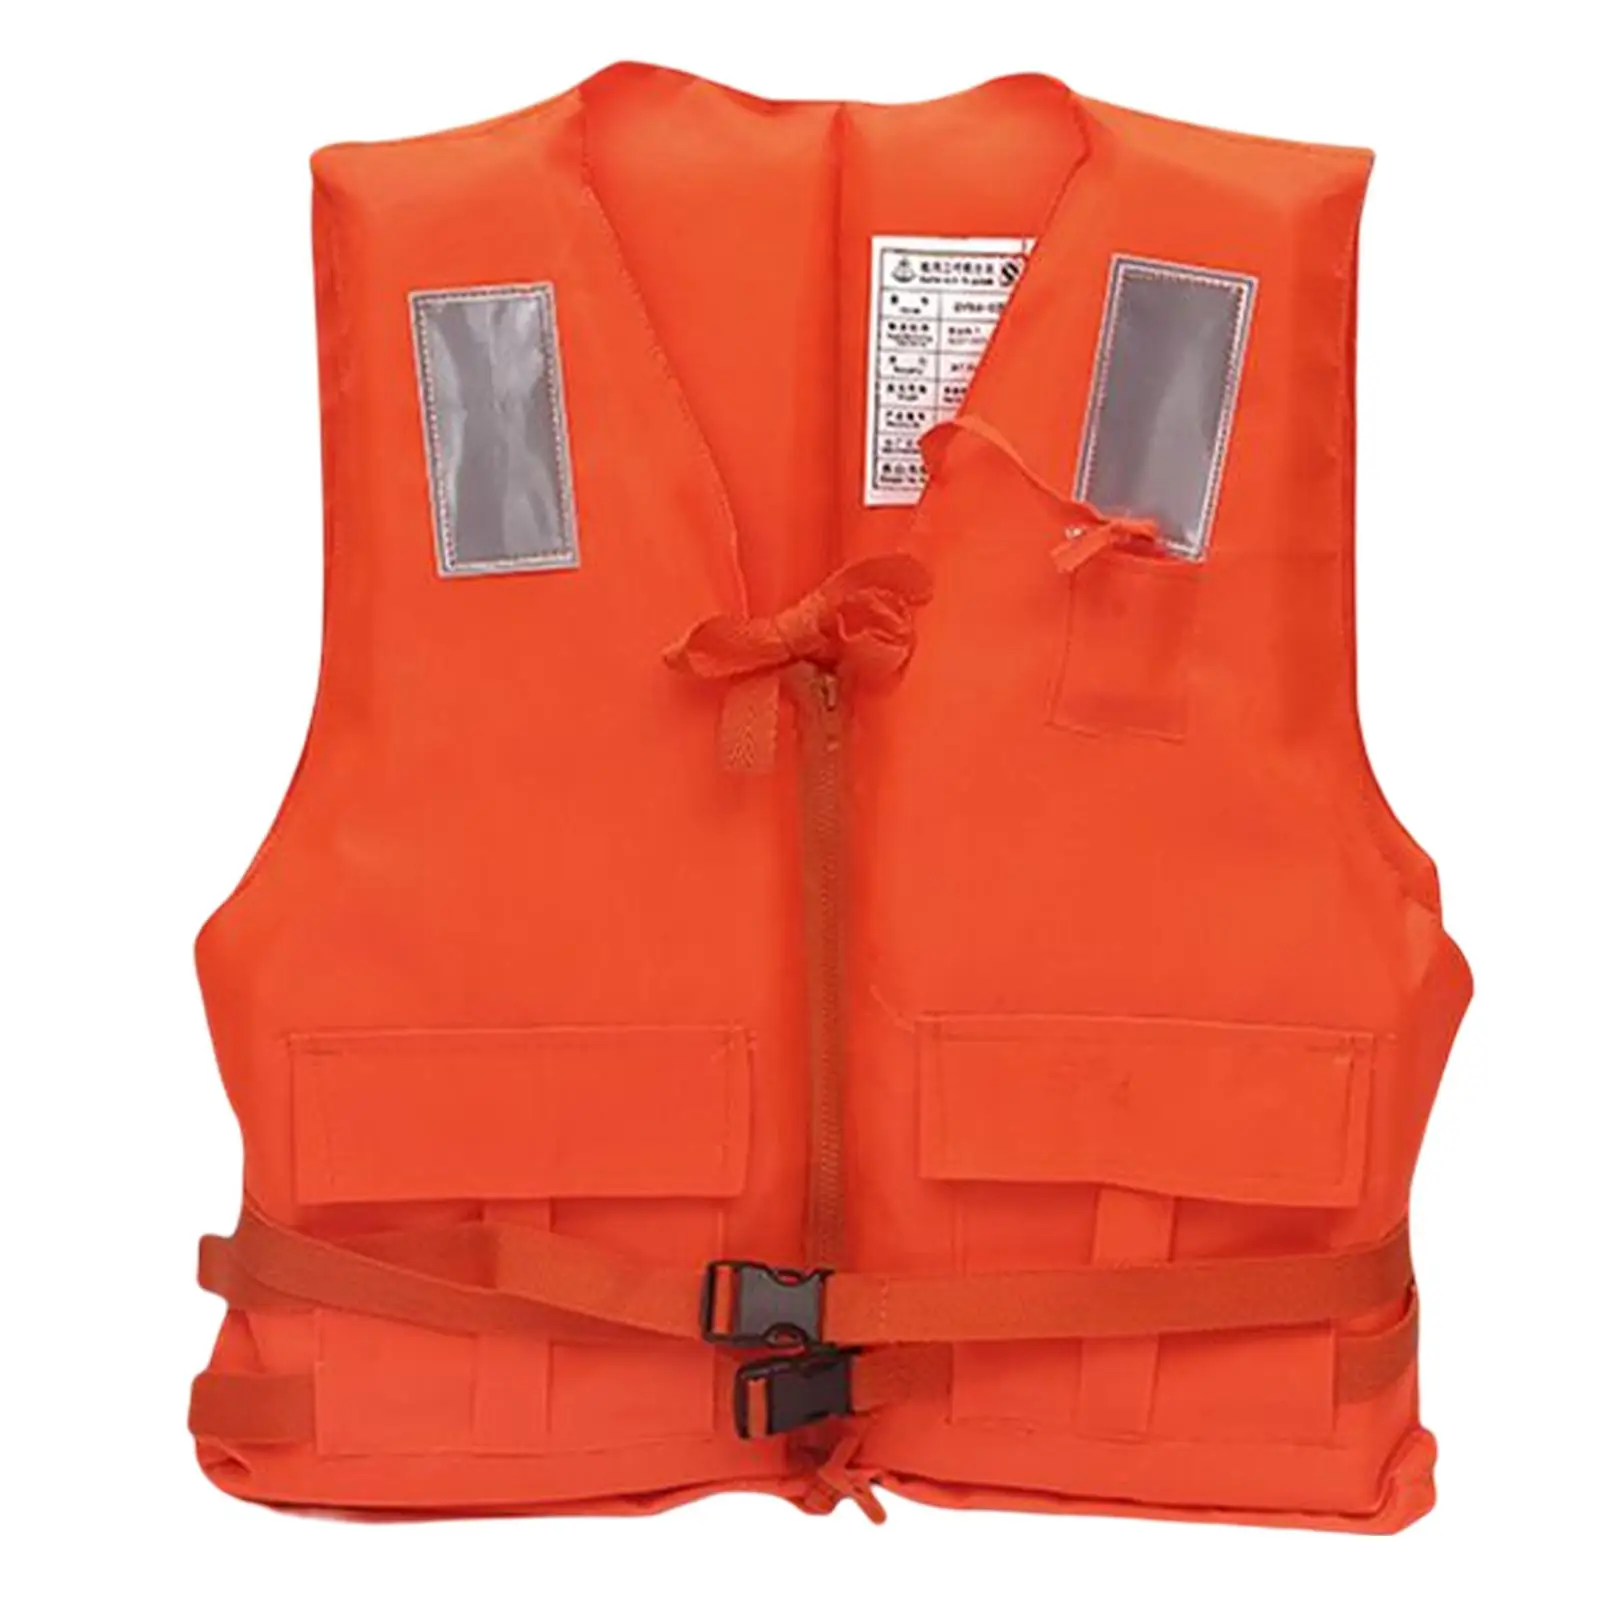 Outdoor Life Jacket Fly Fishing Jacket Reflective Adjustable Adult Life Vest Waistcoat for Ski Surfing Sailing Canoeing Wimming